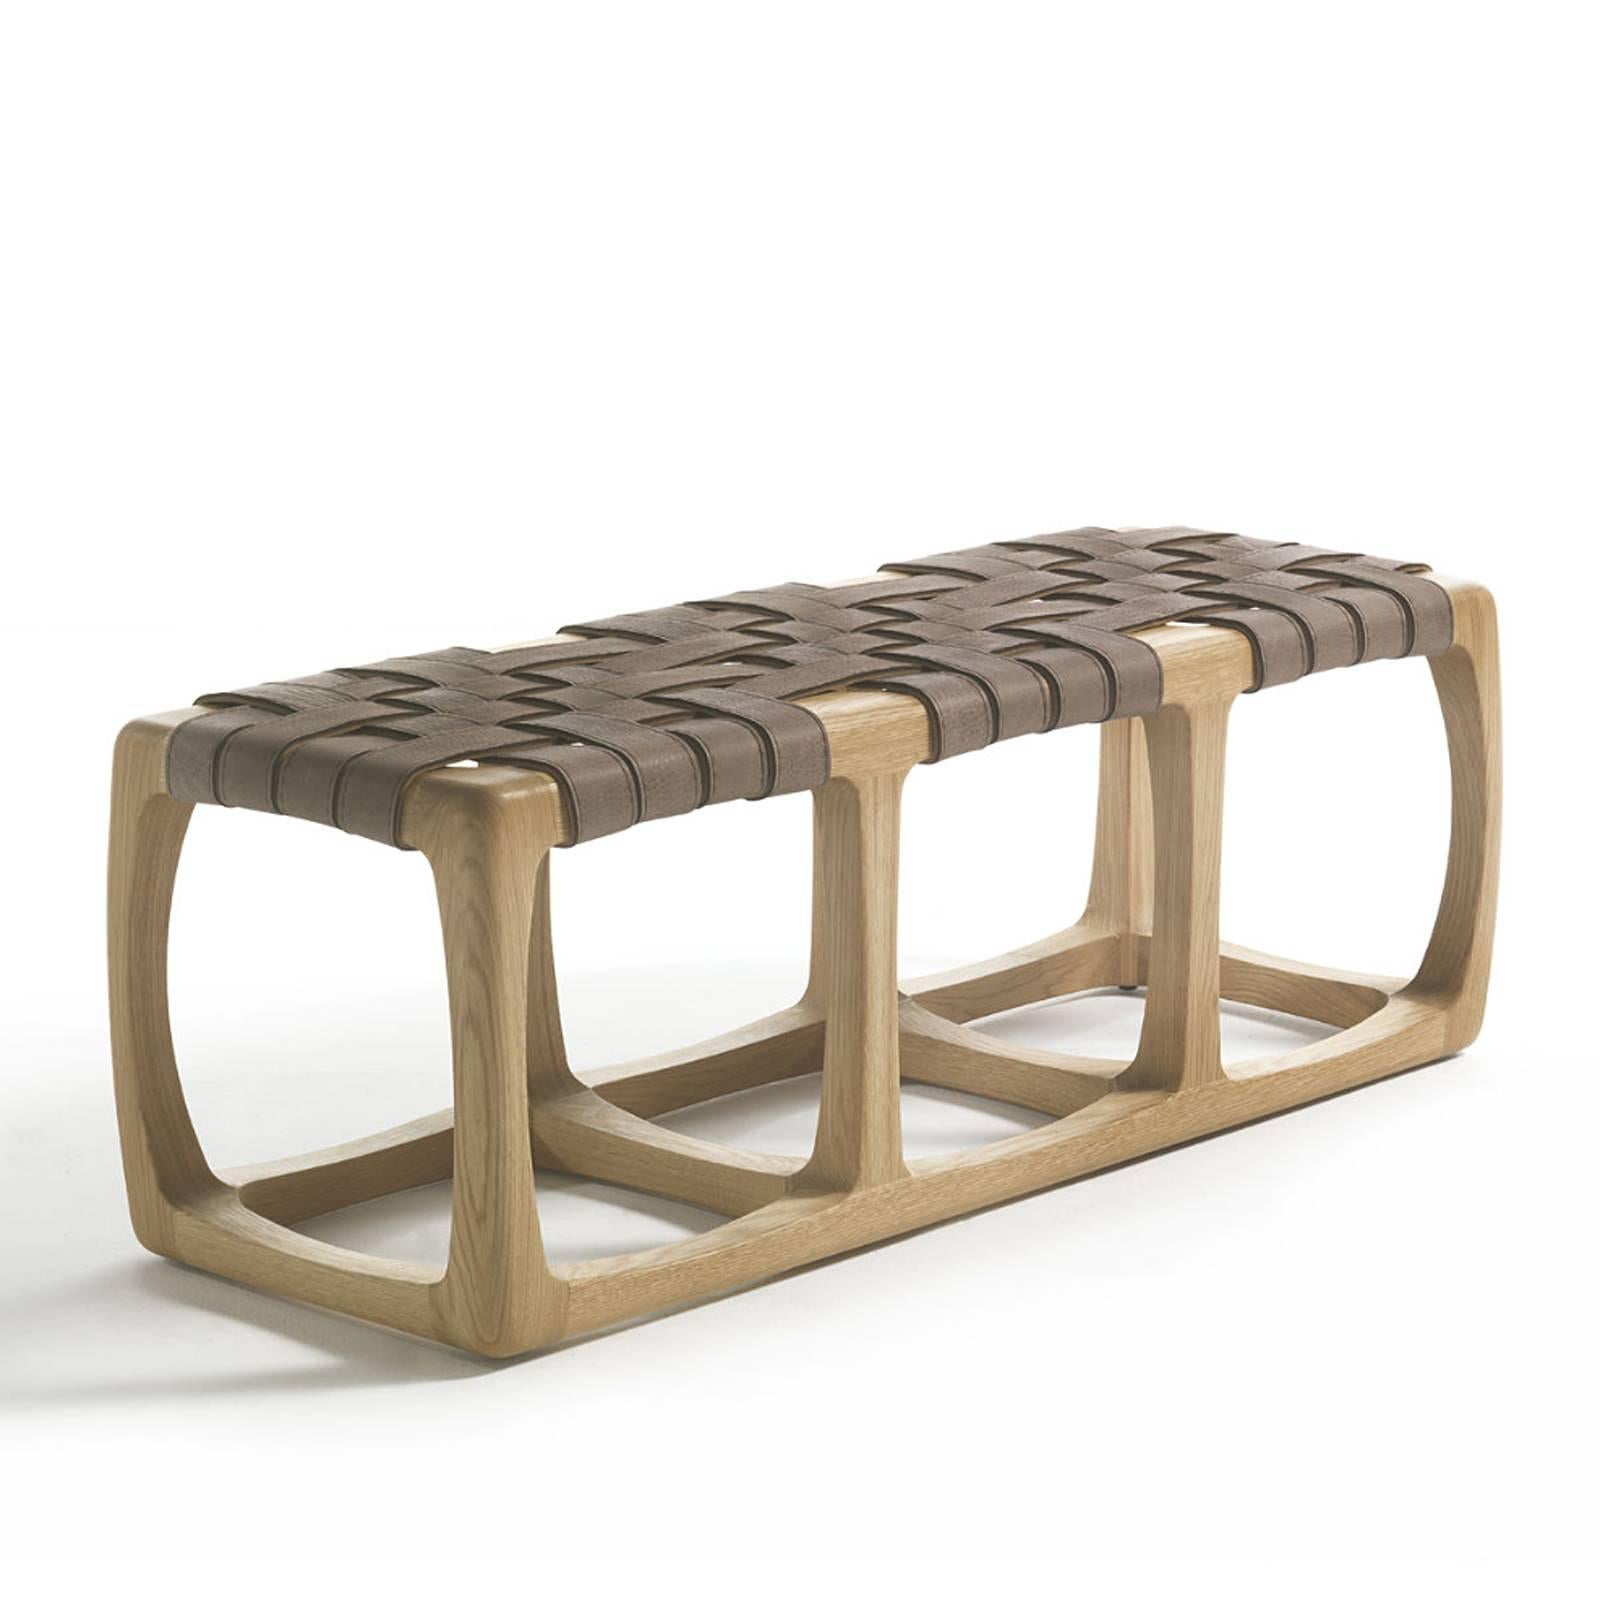 Hand-Crafted Webbing Bench in Solid oak Wood with Genuine Nubuck Leather For Sale